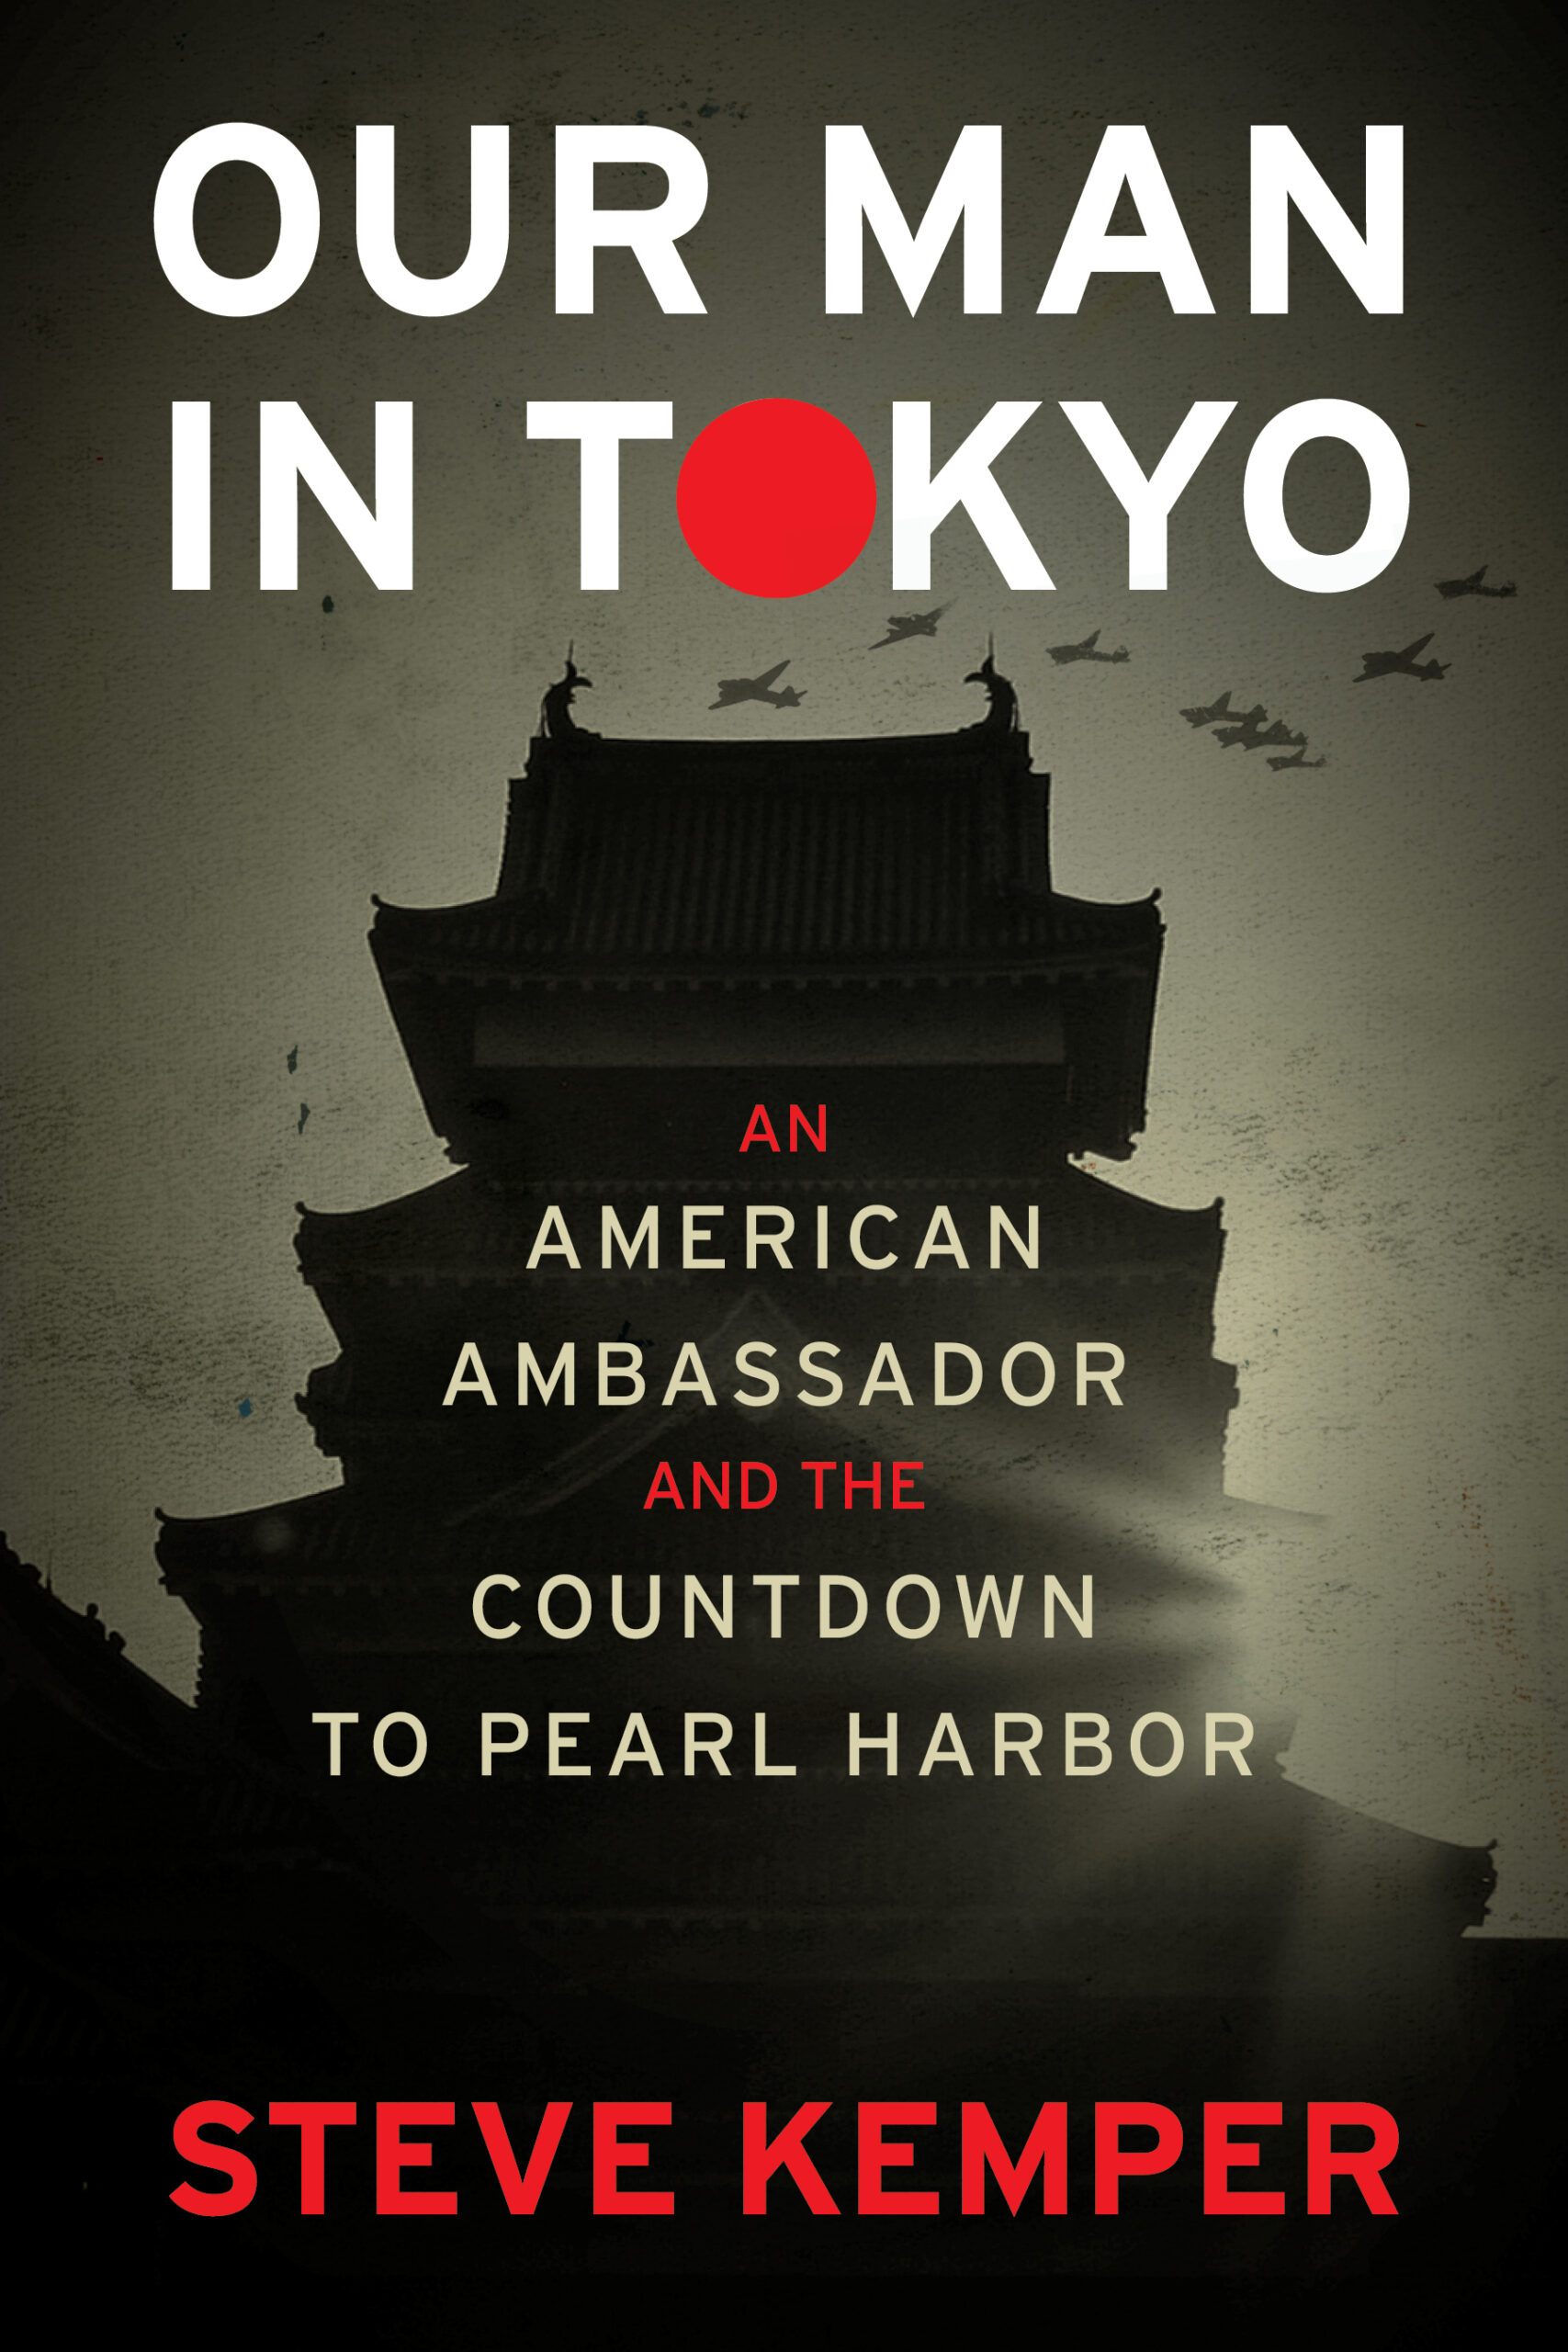 Steve Kemper, "Our Man In Tokyo: An american ambassador and the countdown to Pearl Harbor" Book Cover